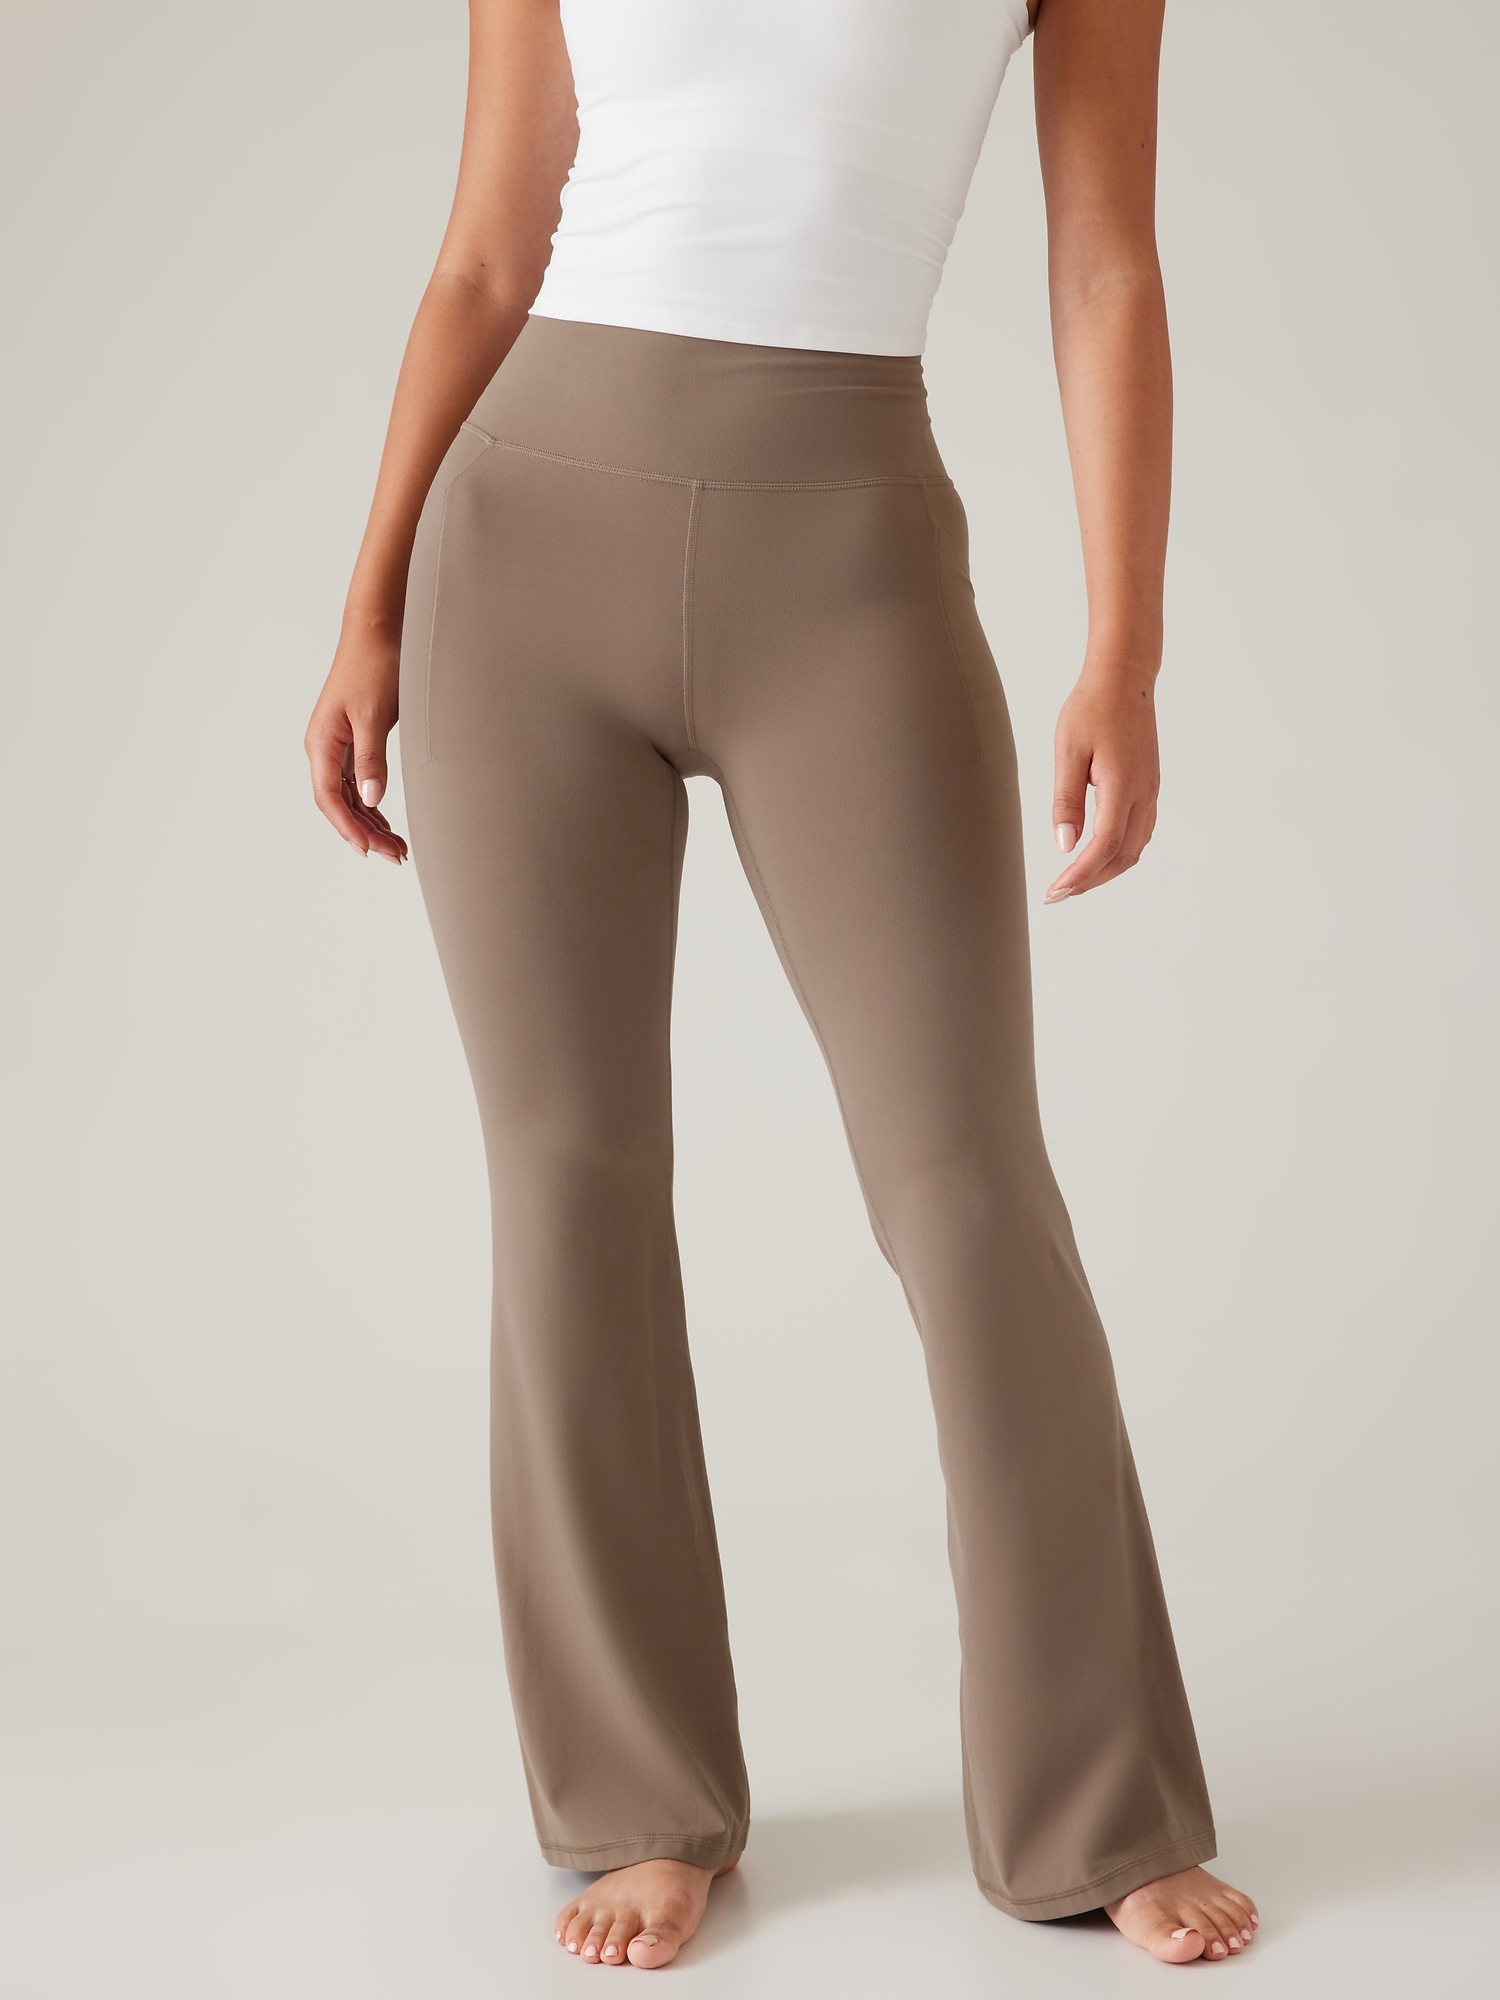 Athleta salutation flare pants are a true fall staple because they're